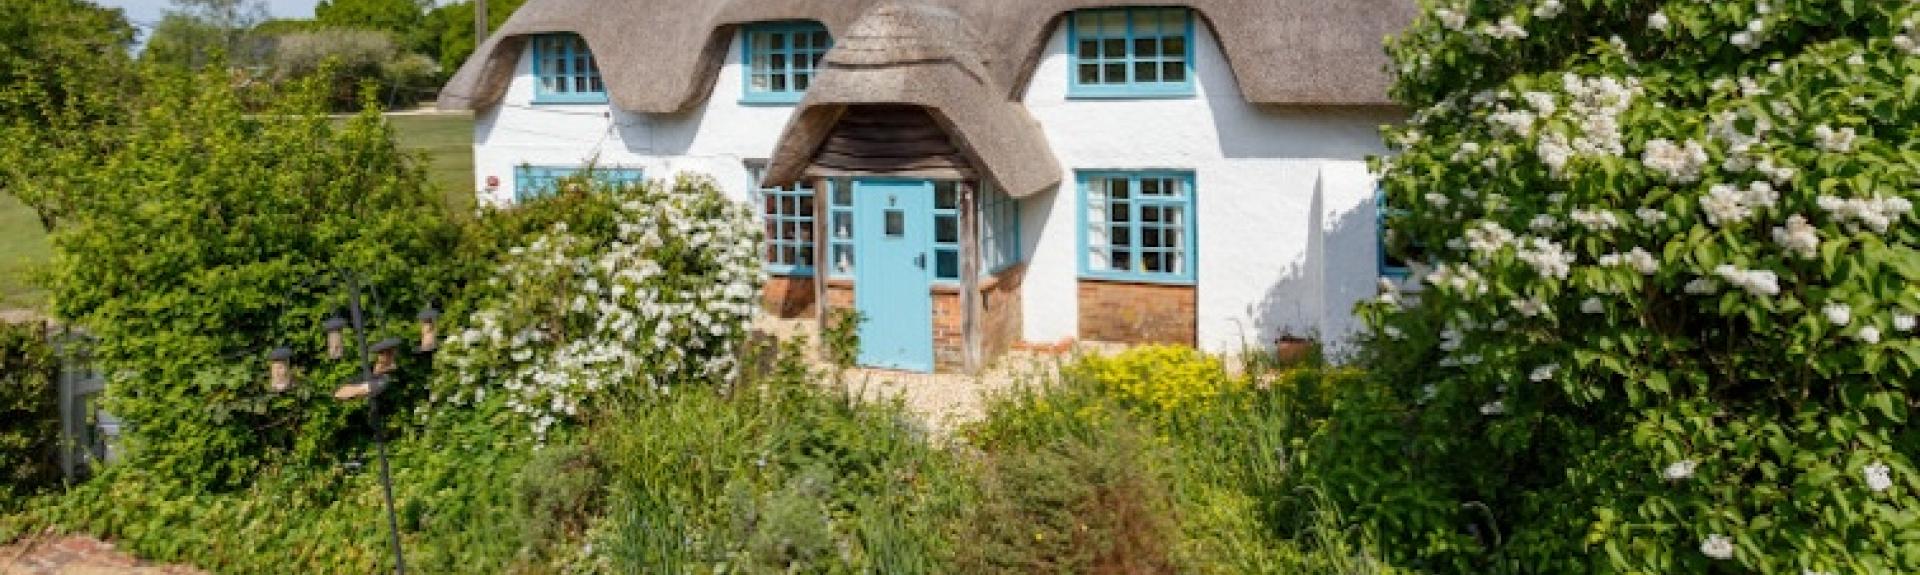 A thatched Hampshire holiday cottage sits behind a flowering hedgerow in the countryside.